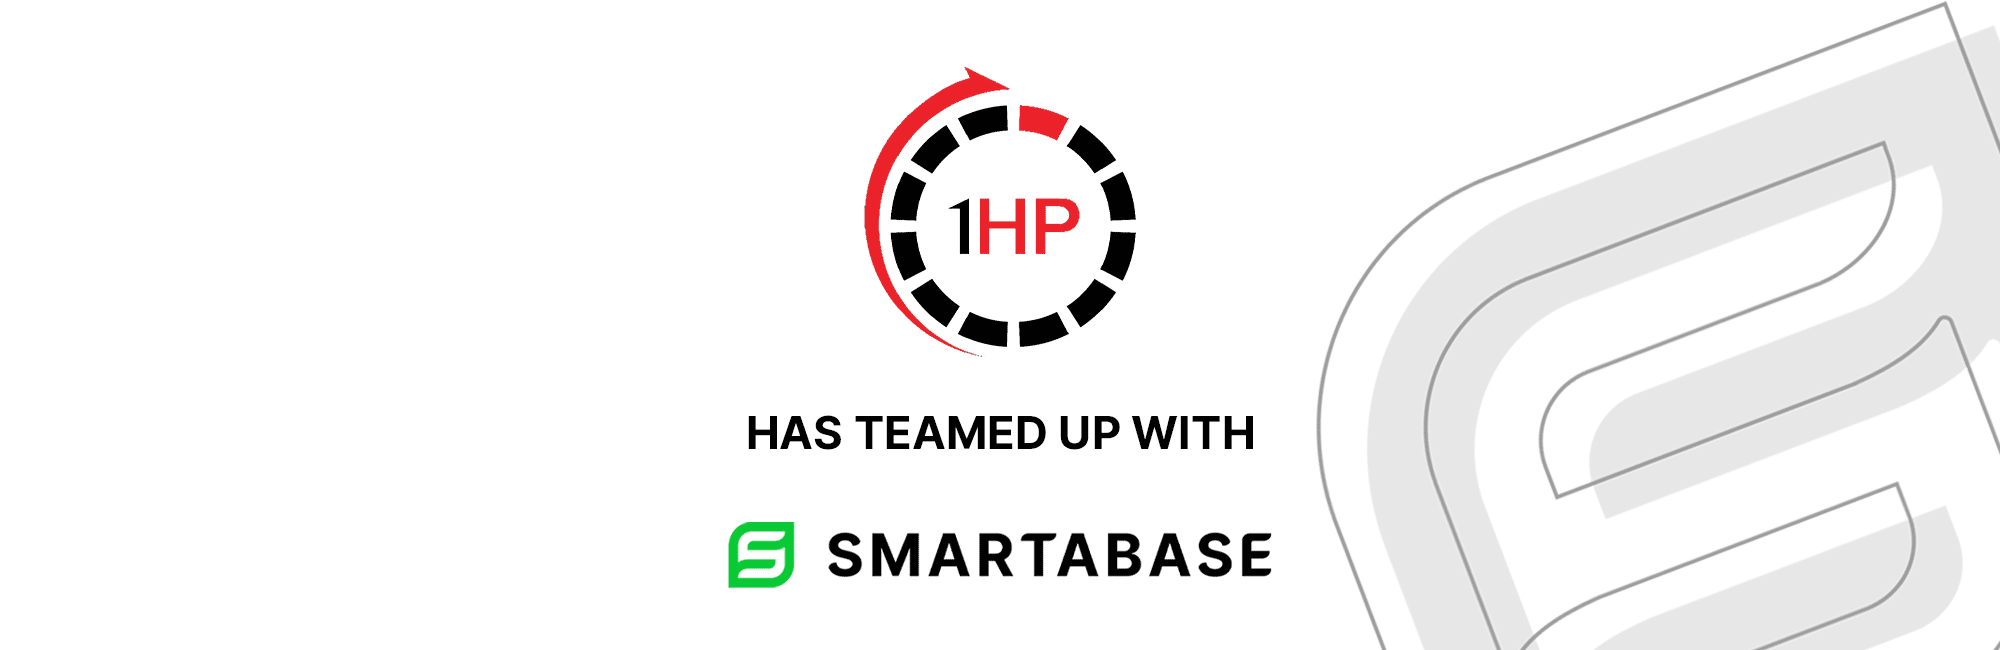 Smartabase Pioneers Performance Insights in Esports with 1HP